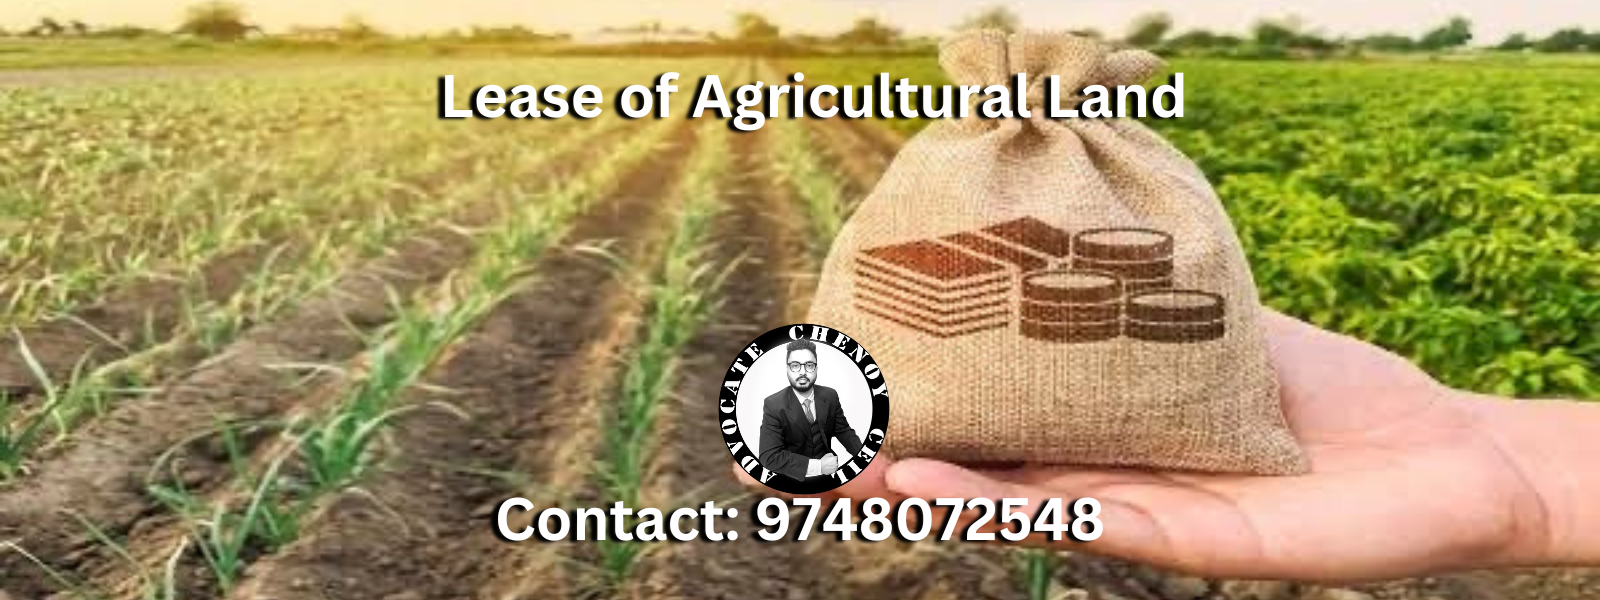 Lease Deed Format for Agricultural Land